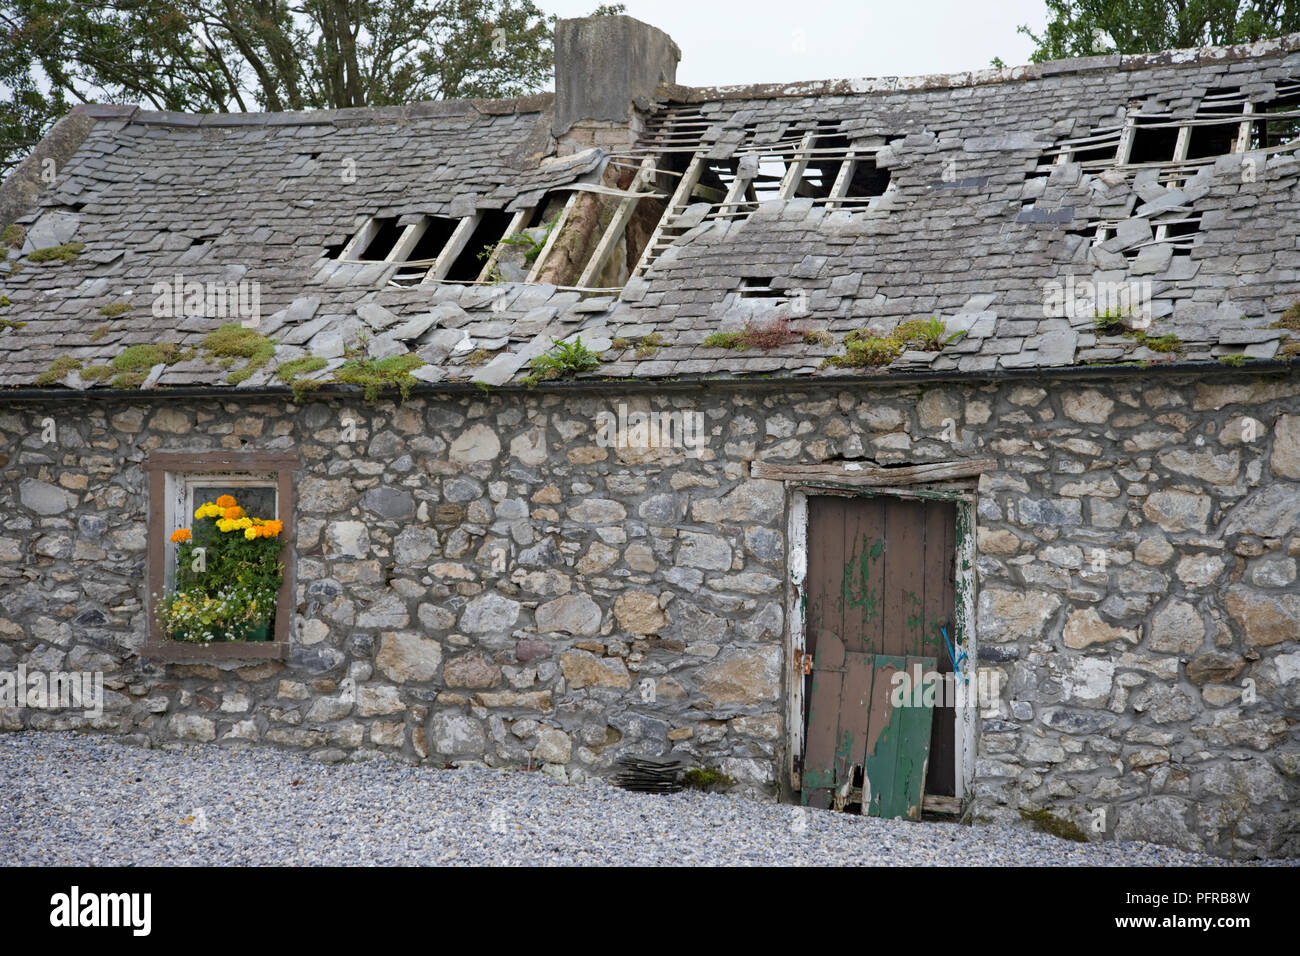 Republic of Ireland, County Tipperary, Terryglass, remains of rural cottage near Portumna showing badly damaged slate roof Stock Photo